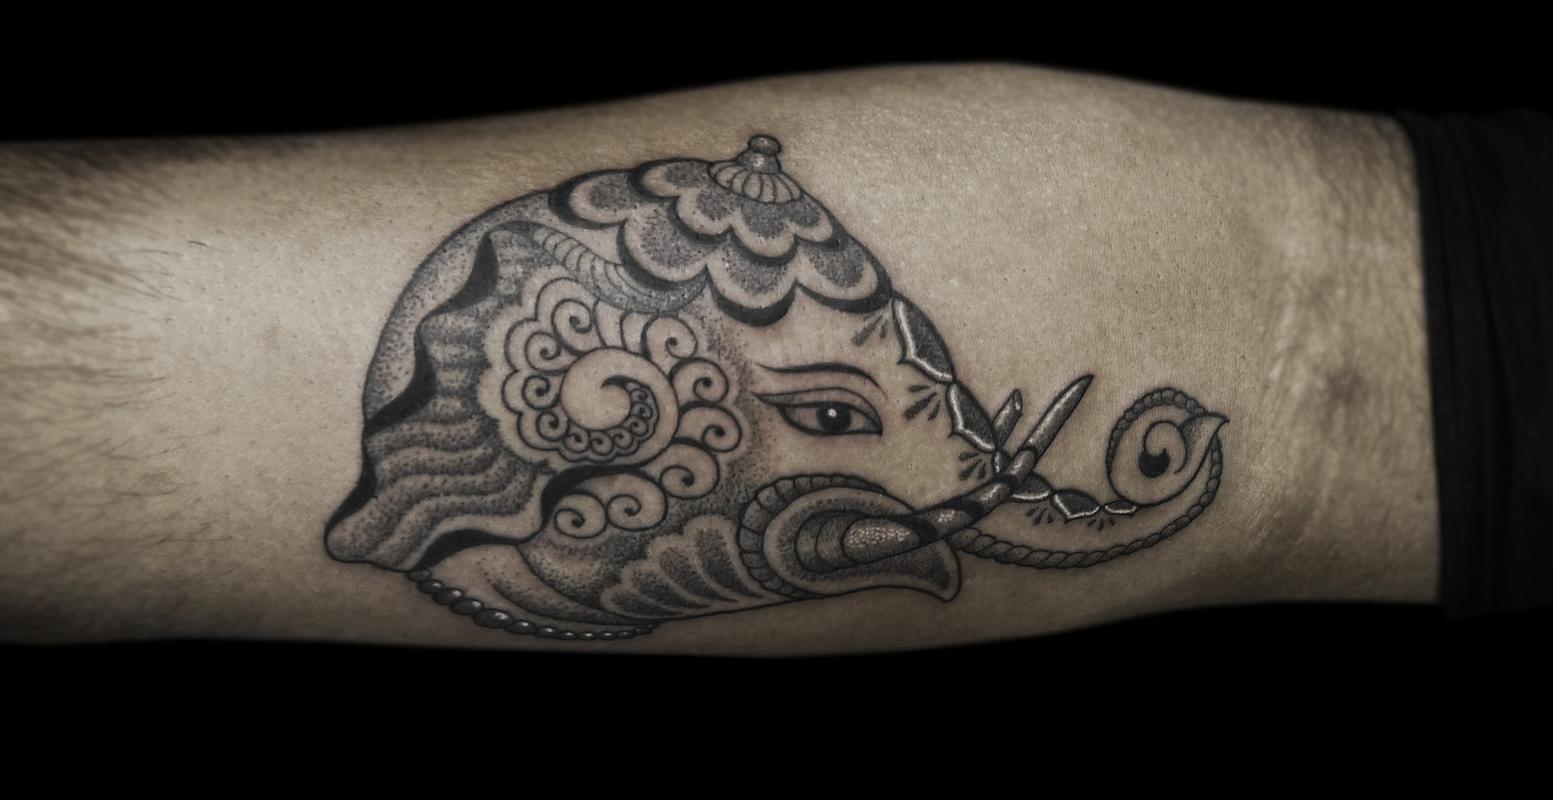 BONGO STYLE ELEPHANT  - PERSONALIZED STYLE COMBINING ELEMENTS OF  BENGALI/INDIAN FOLK ART RENDERED IN DOTWORK AND LINEWORK by Obi: TattooNOW